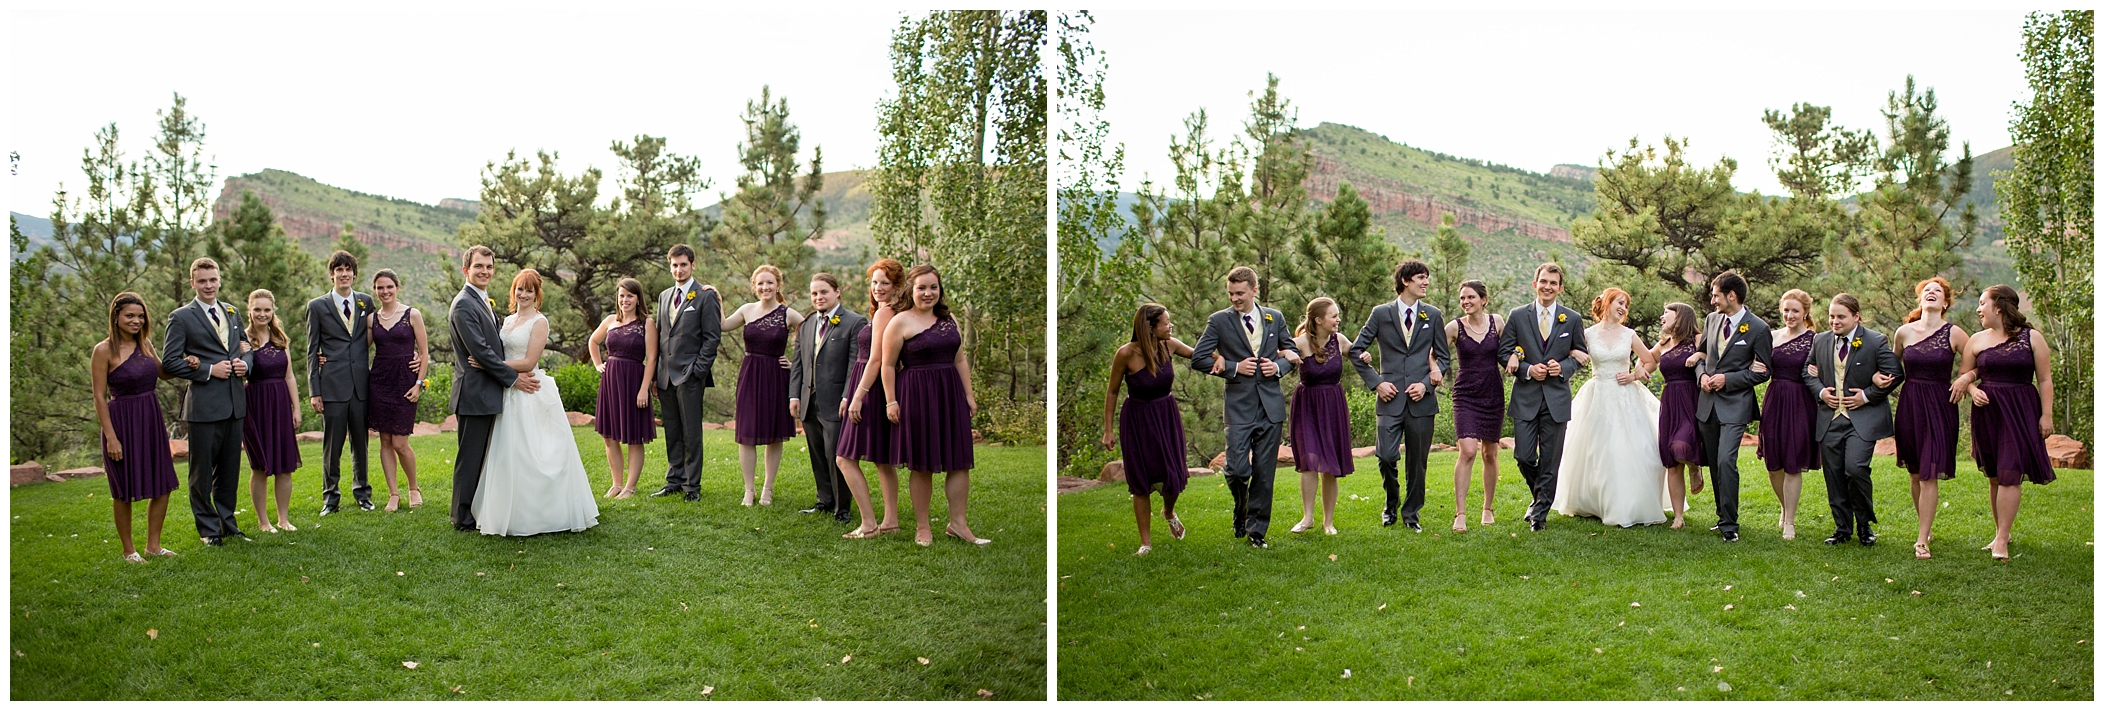 purple and gray wedding party 